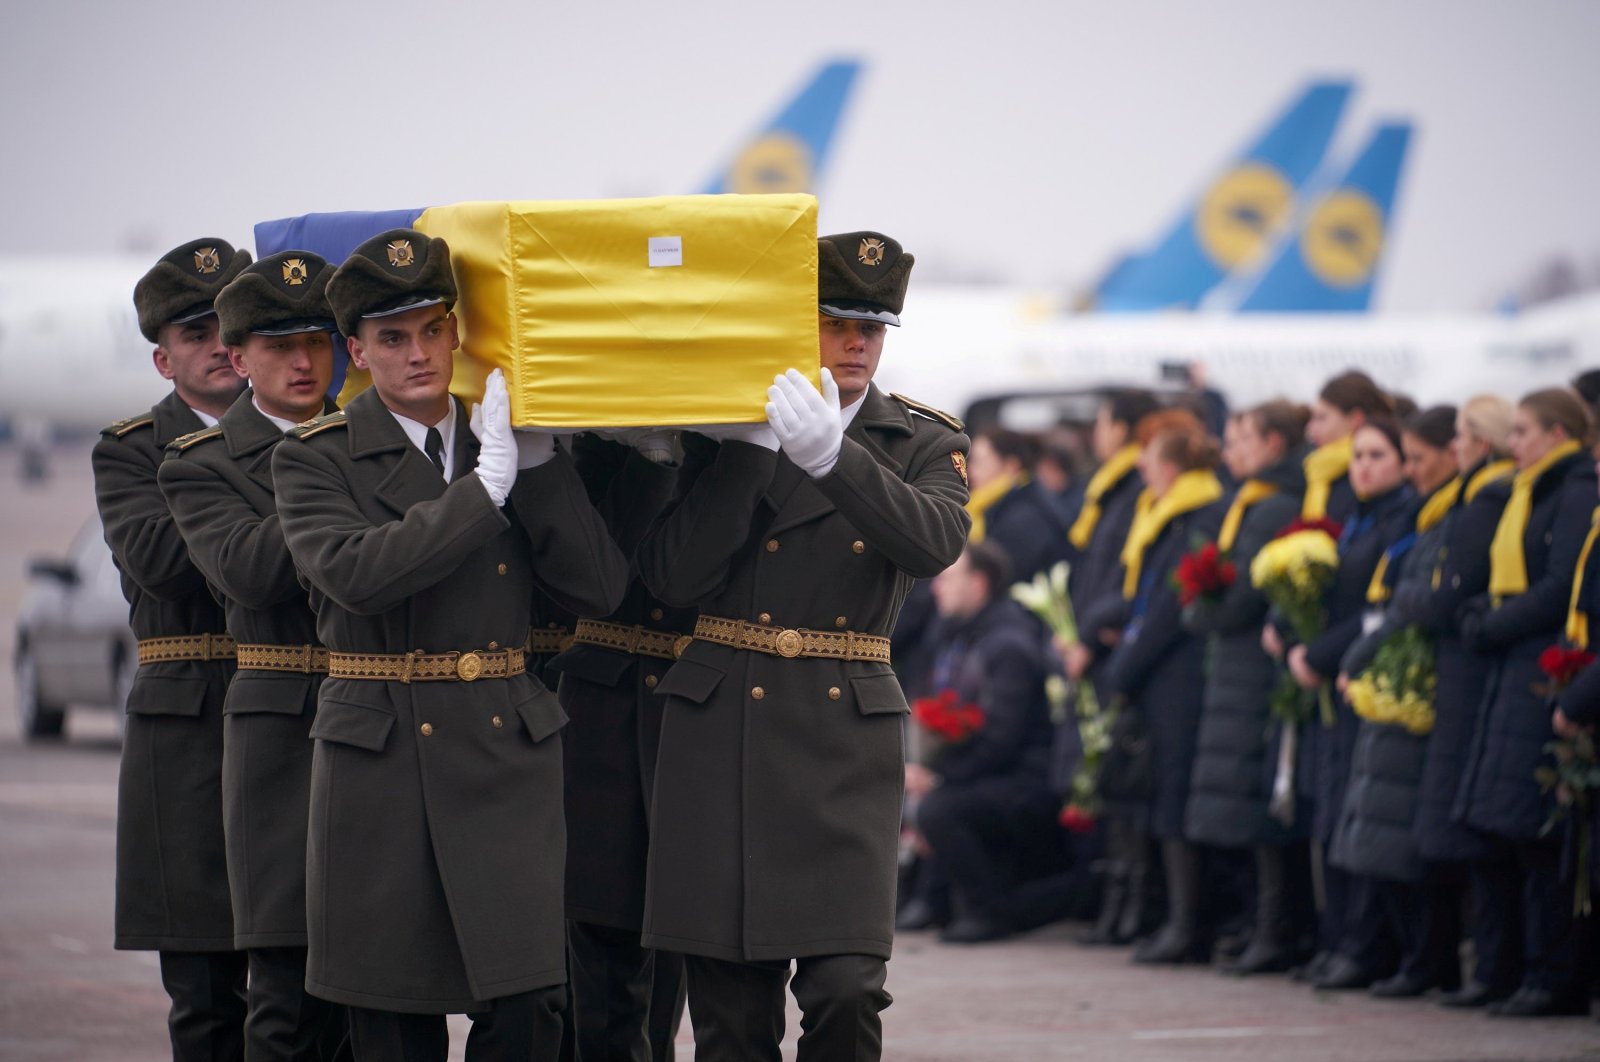 Soldiers carry a coffin containing the remains of one of the 11 Ukrainian victims of the Ukraine International Airlines flight 752 plane disaster during a memorial ceremony at the Boryspil International Airport, outside Kyiv, Ukraine, Jan. 19, 2020. (Ukrainian Presidential Press Service via Reuters)